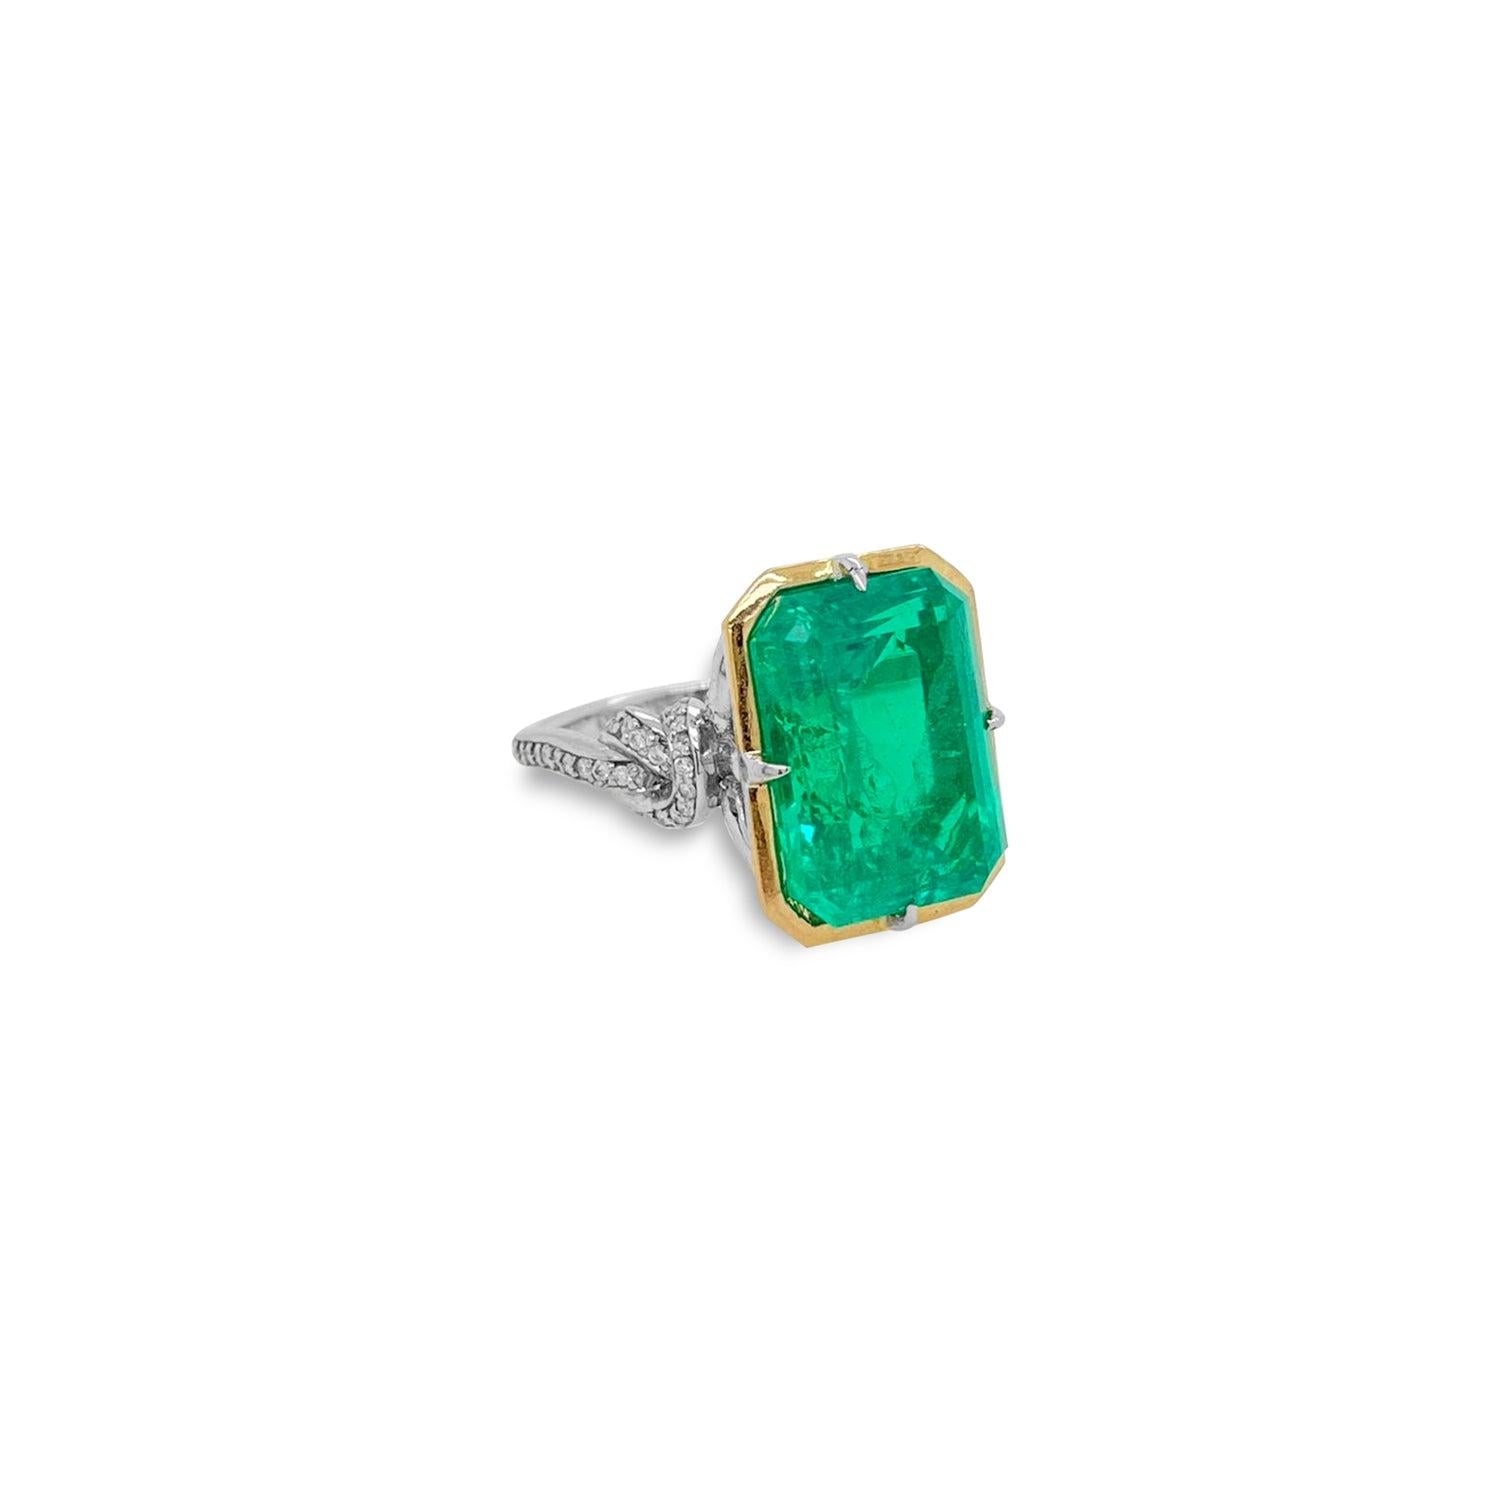 5.79ct Zambian Emerald in Forget Me Knot Style Ring 7